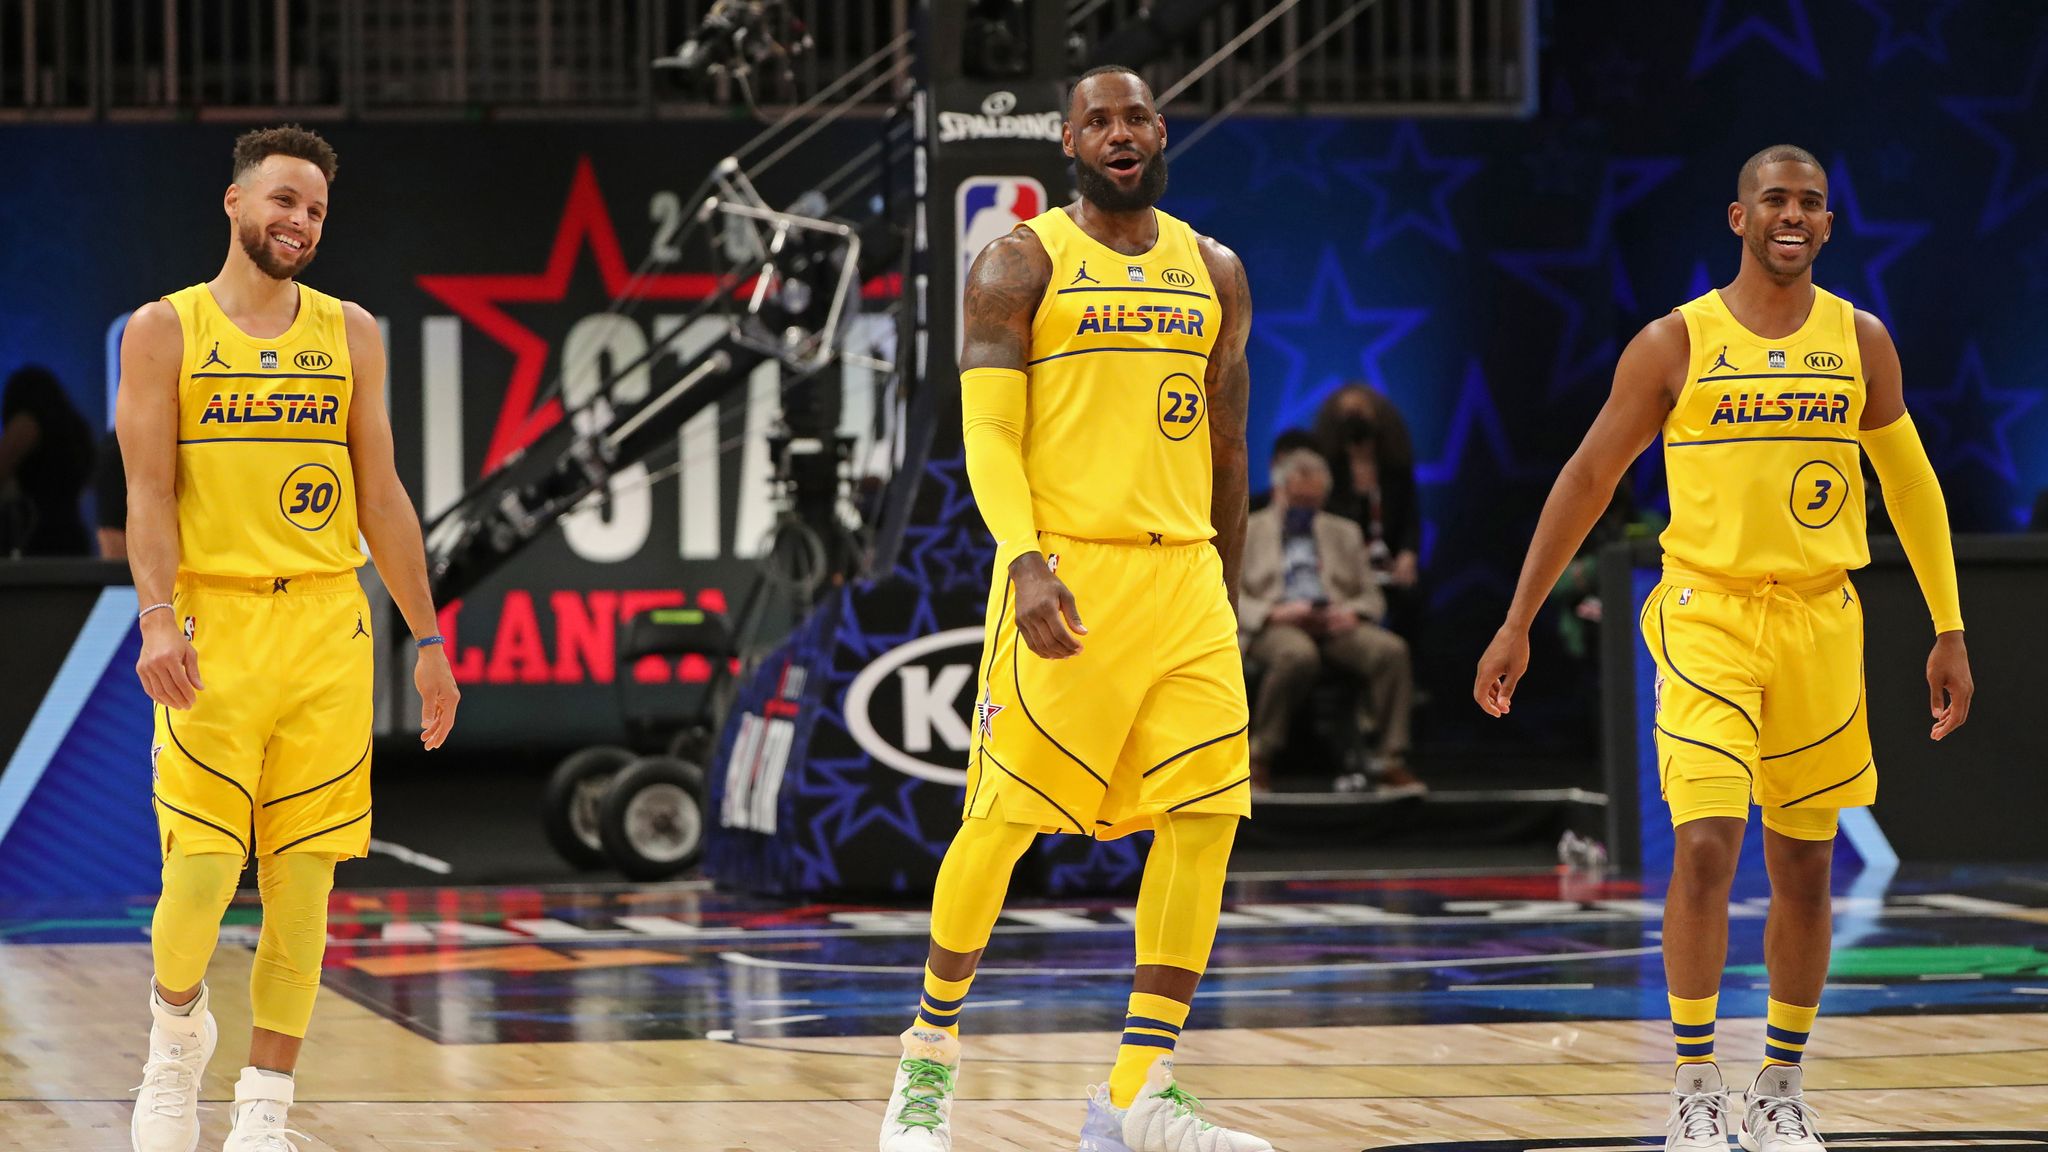 Team LeBron Wins the 2021 NBA All-Star Game  Curry nba, Nba wallpapers  stephen curry, Lebron james